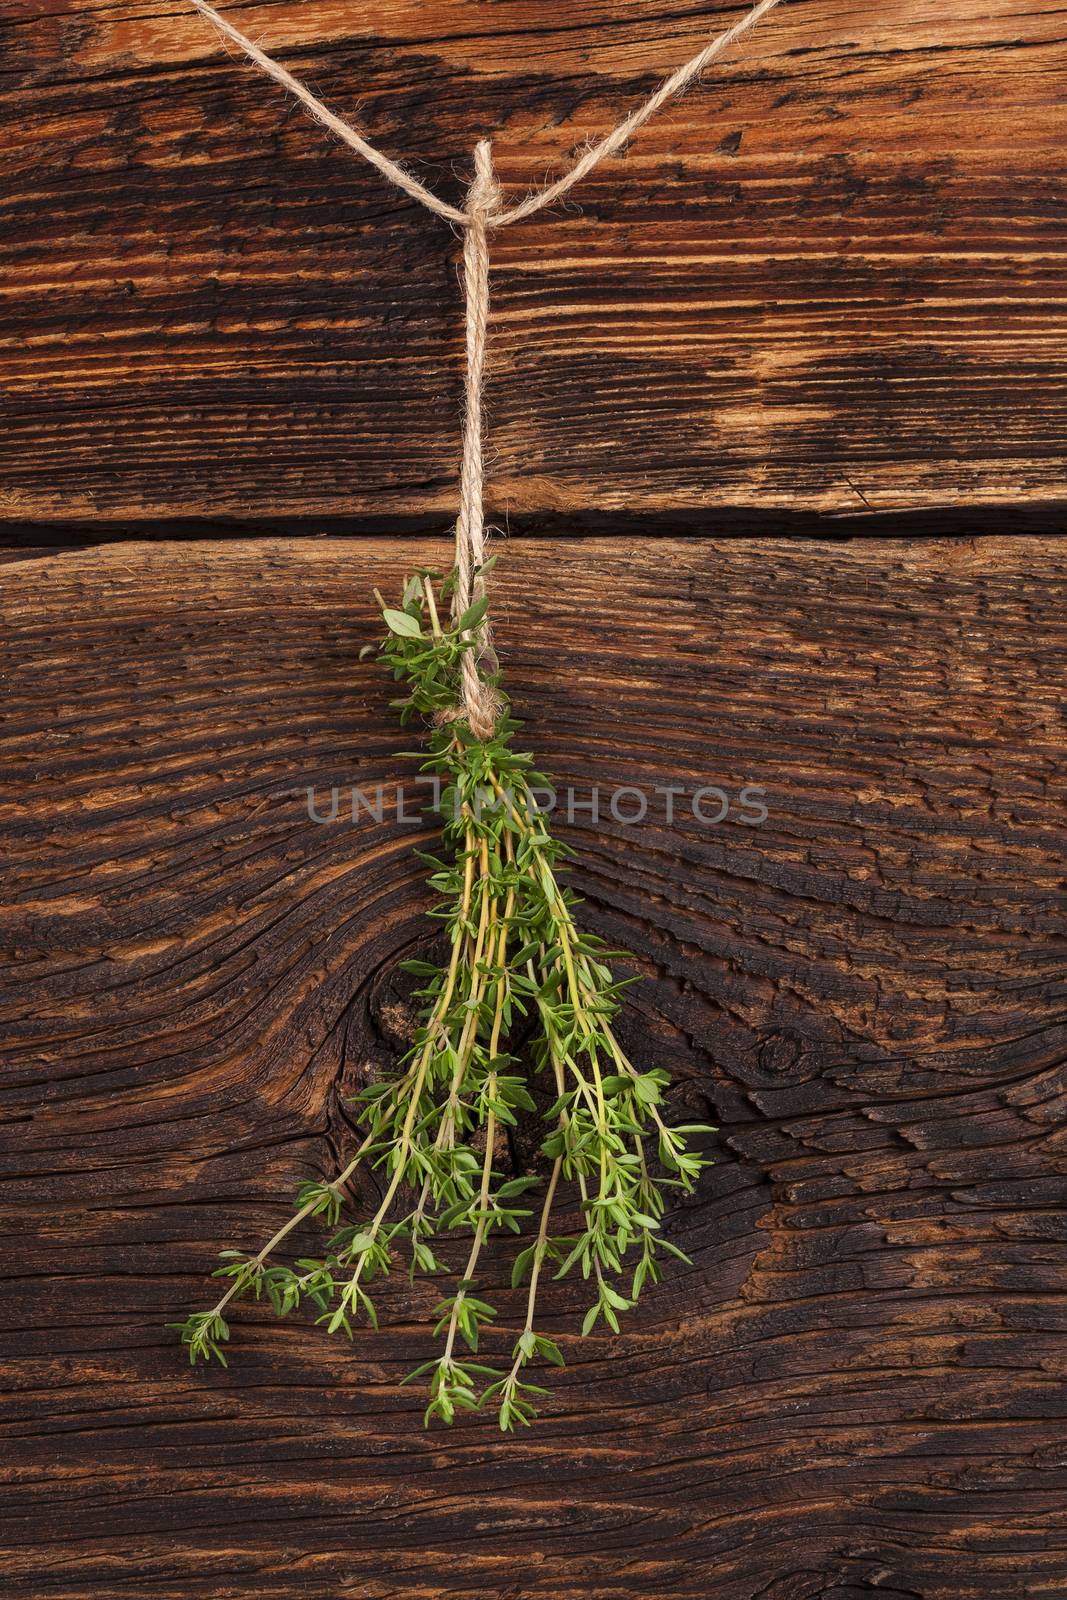 Thyme herb. by eskymaks